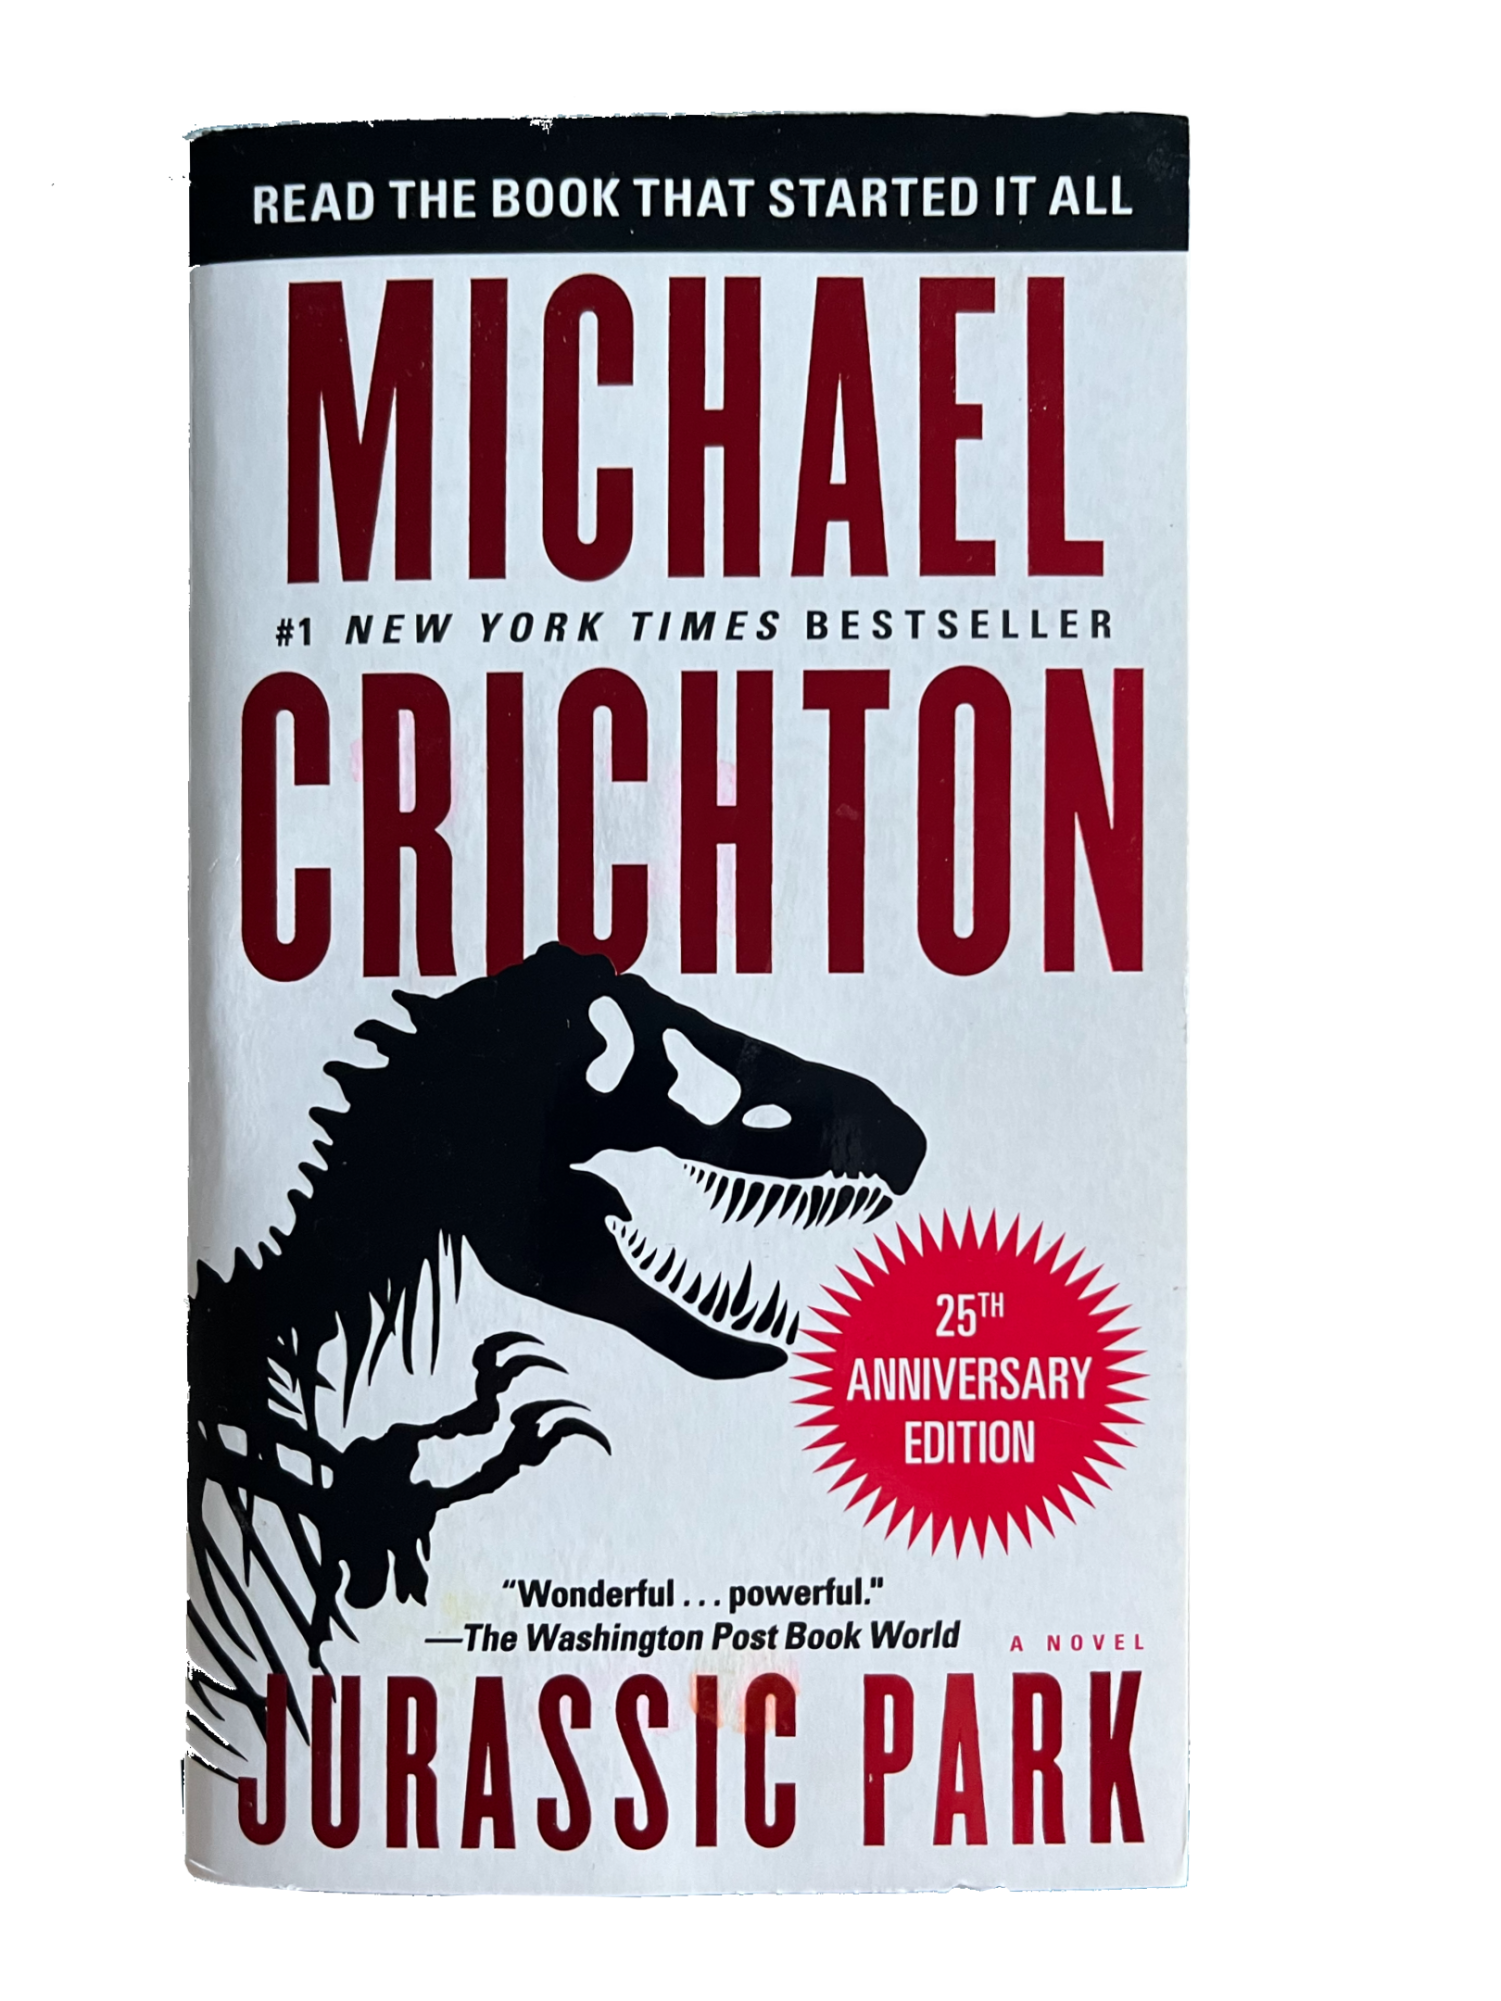 For many Jurassic Park may have been introduced to them by the famous movie series started in 1993. This book is known for being a staple in the sci-fi world and was only published 3 year before the film.